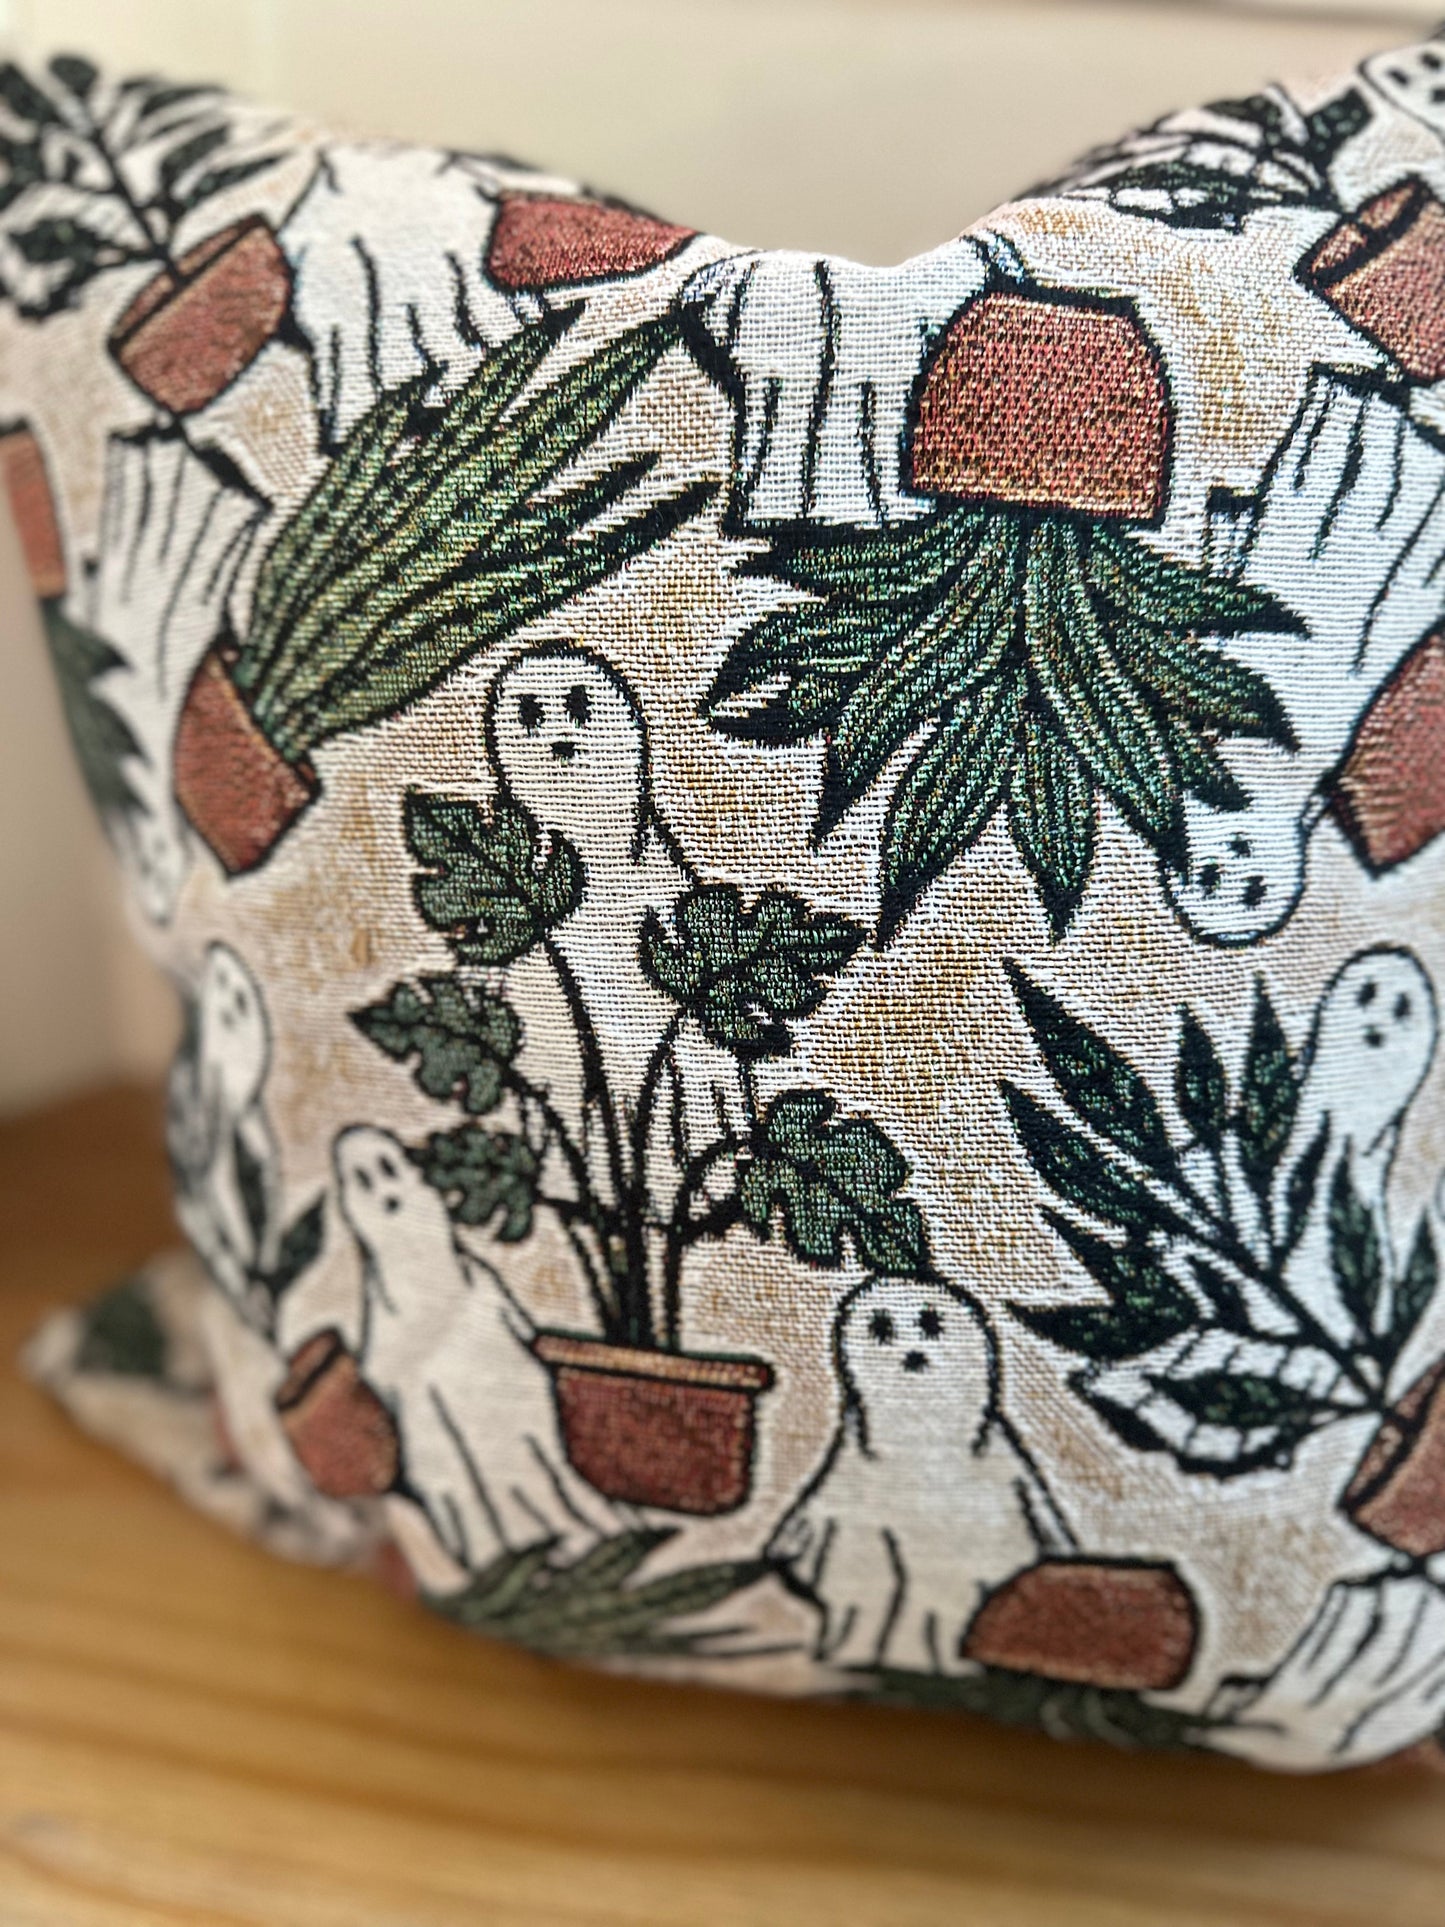 Ghost With Potted Plants Woven Pillows 18x17”